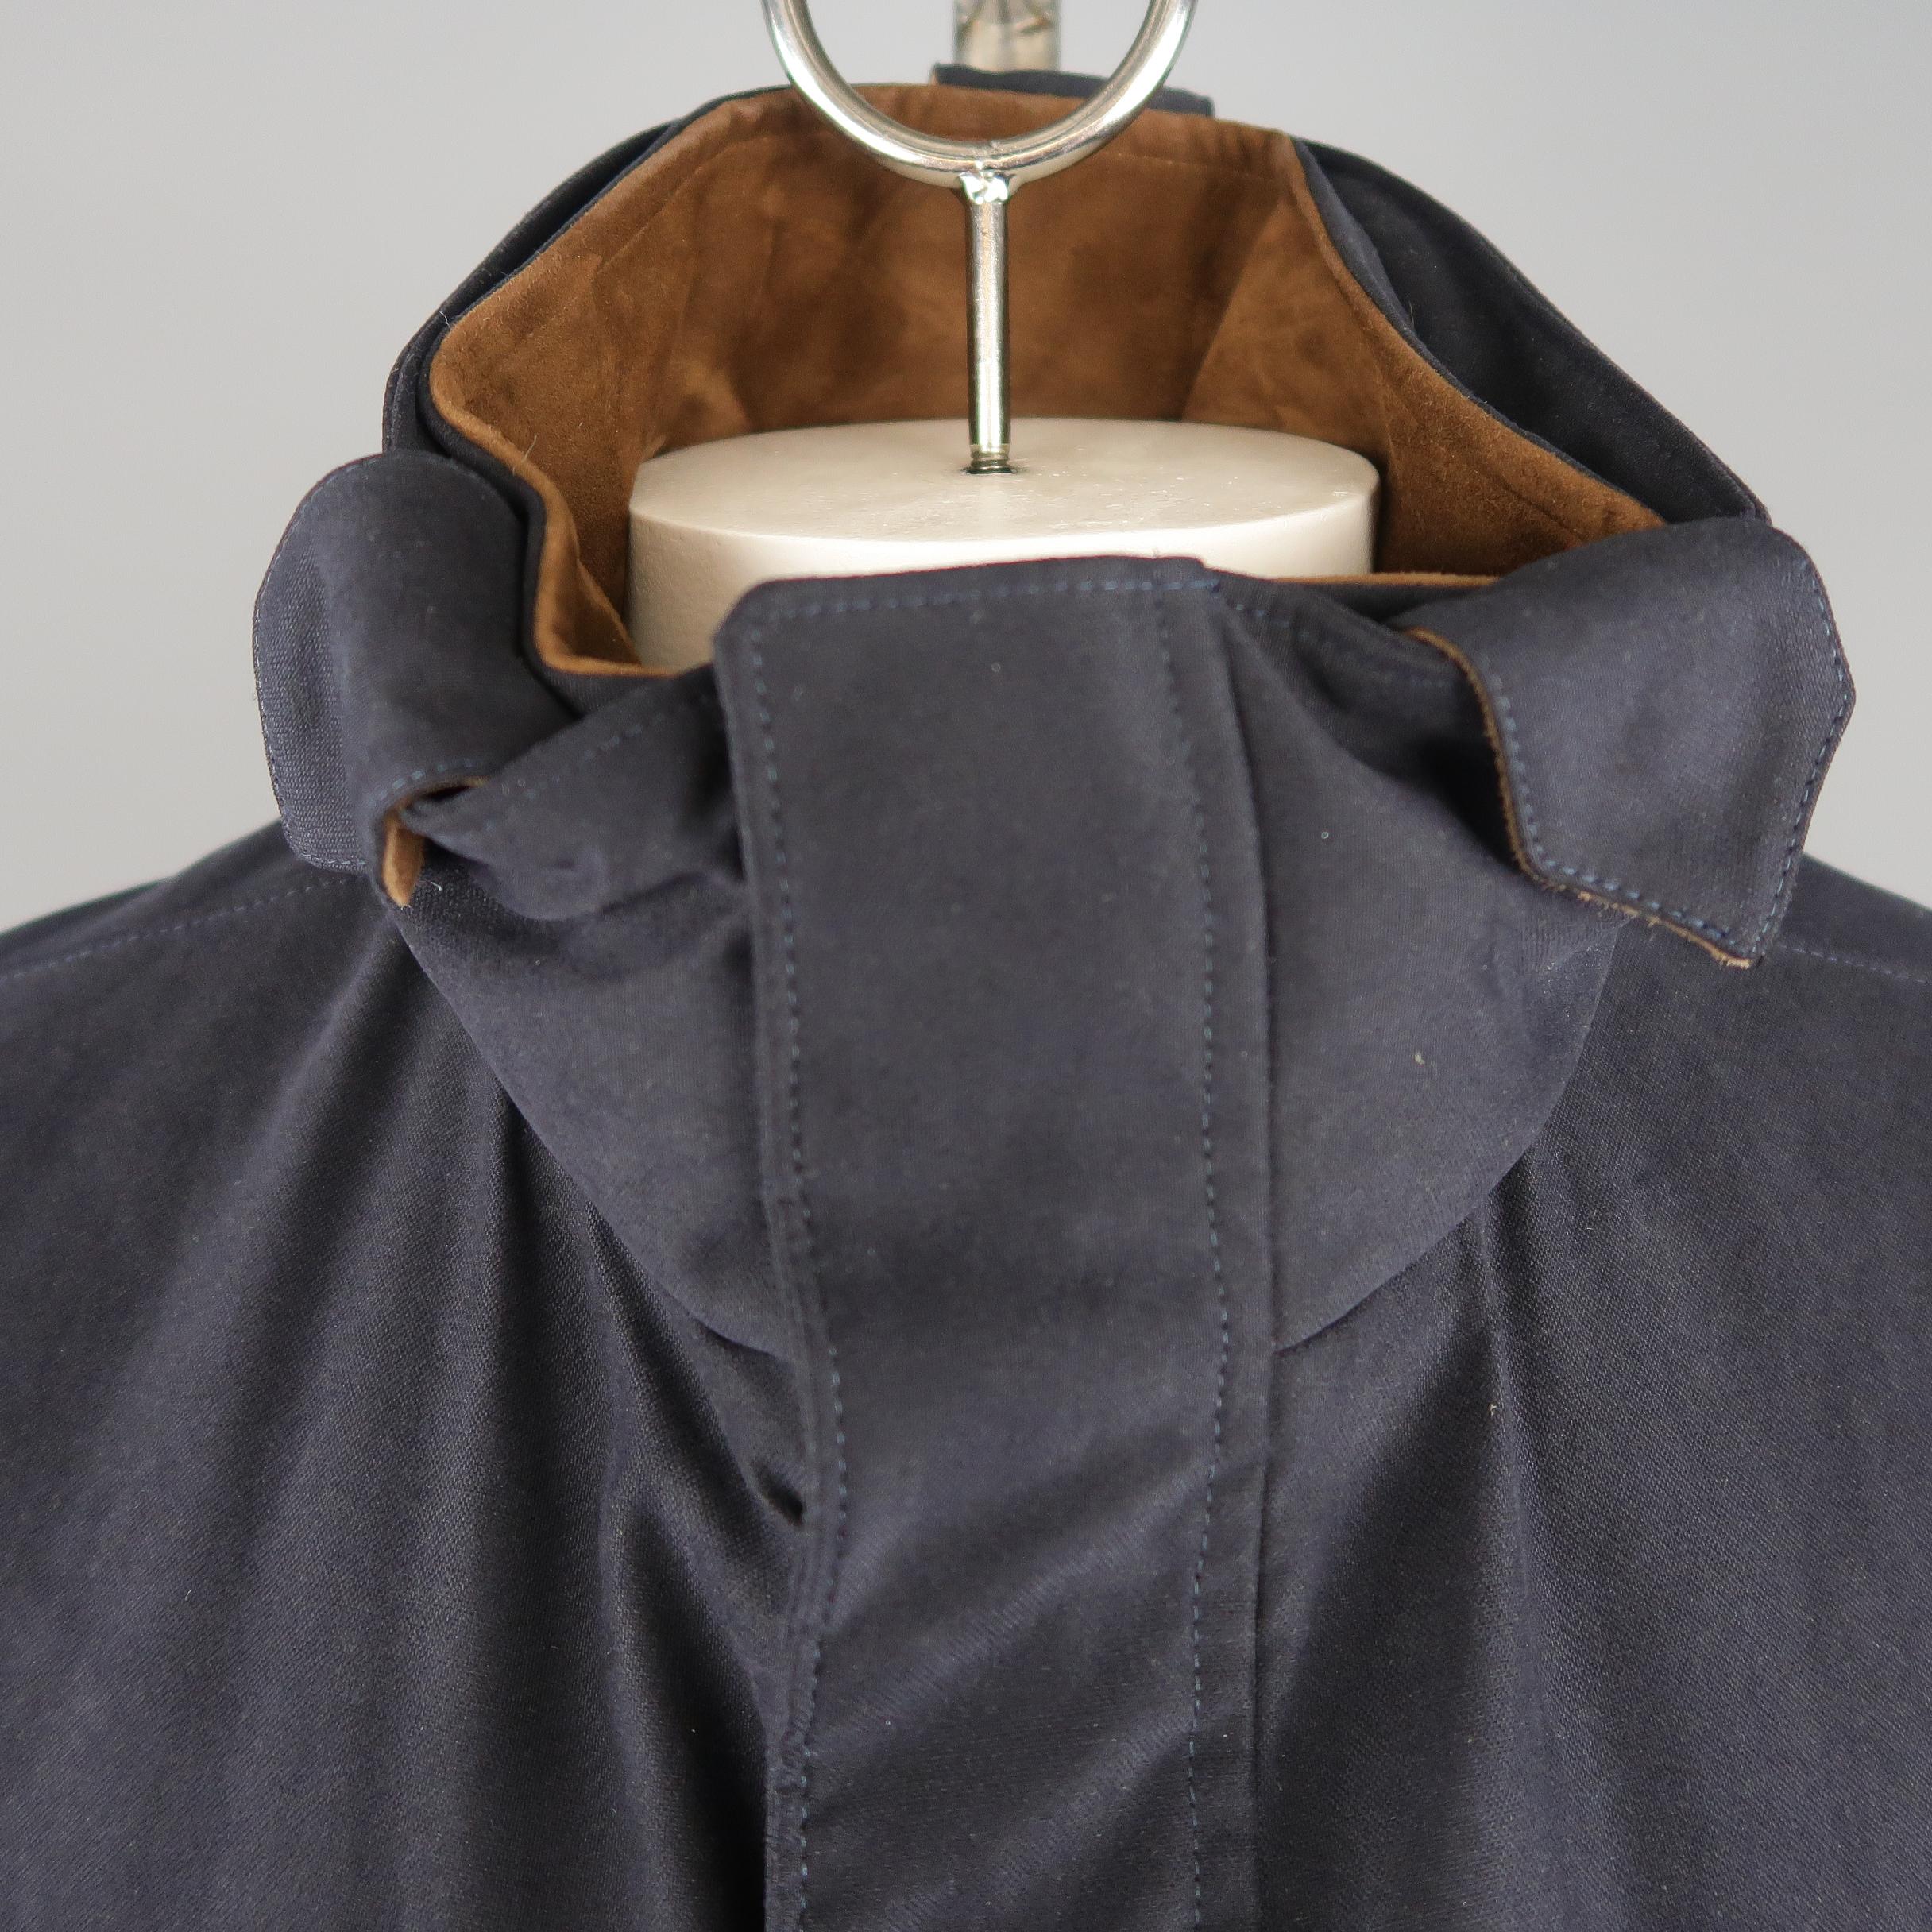 LORO PIANA Storm System jacket comes in navy fabric with a high collar, double zip  front with snap placket, slanted zip pockets, flap pockets, detachable inner collar, and brown suede trim. Made In Italy.
 
New without Tags. Retails: